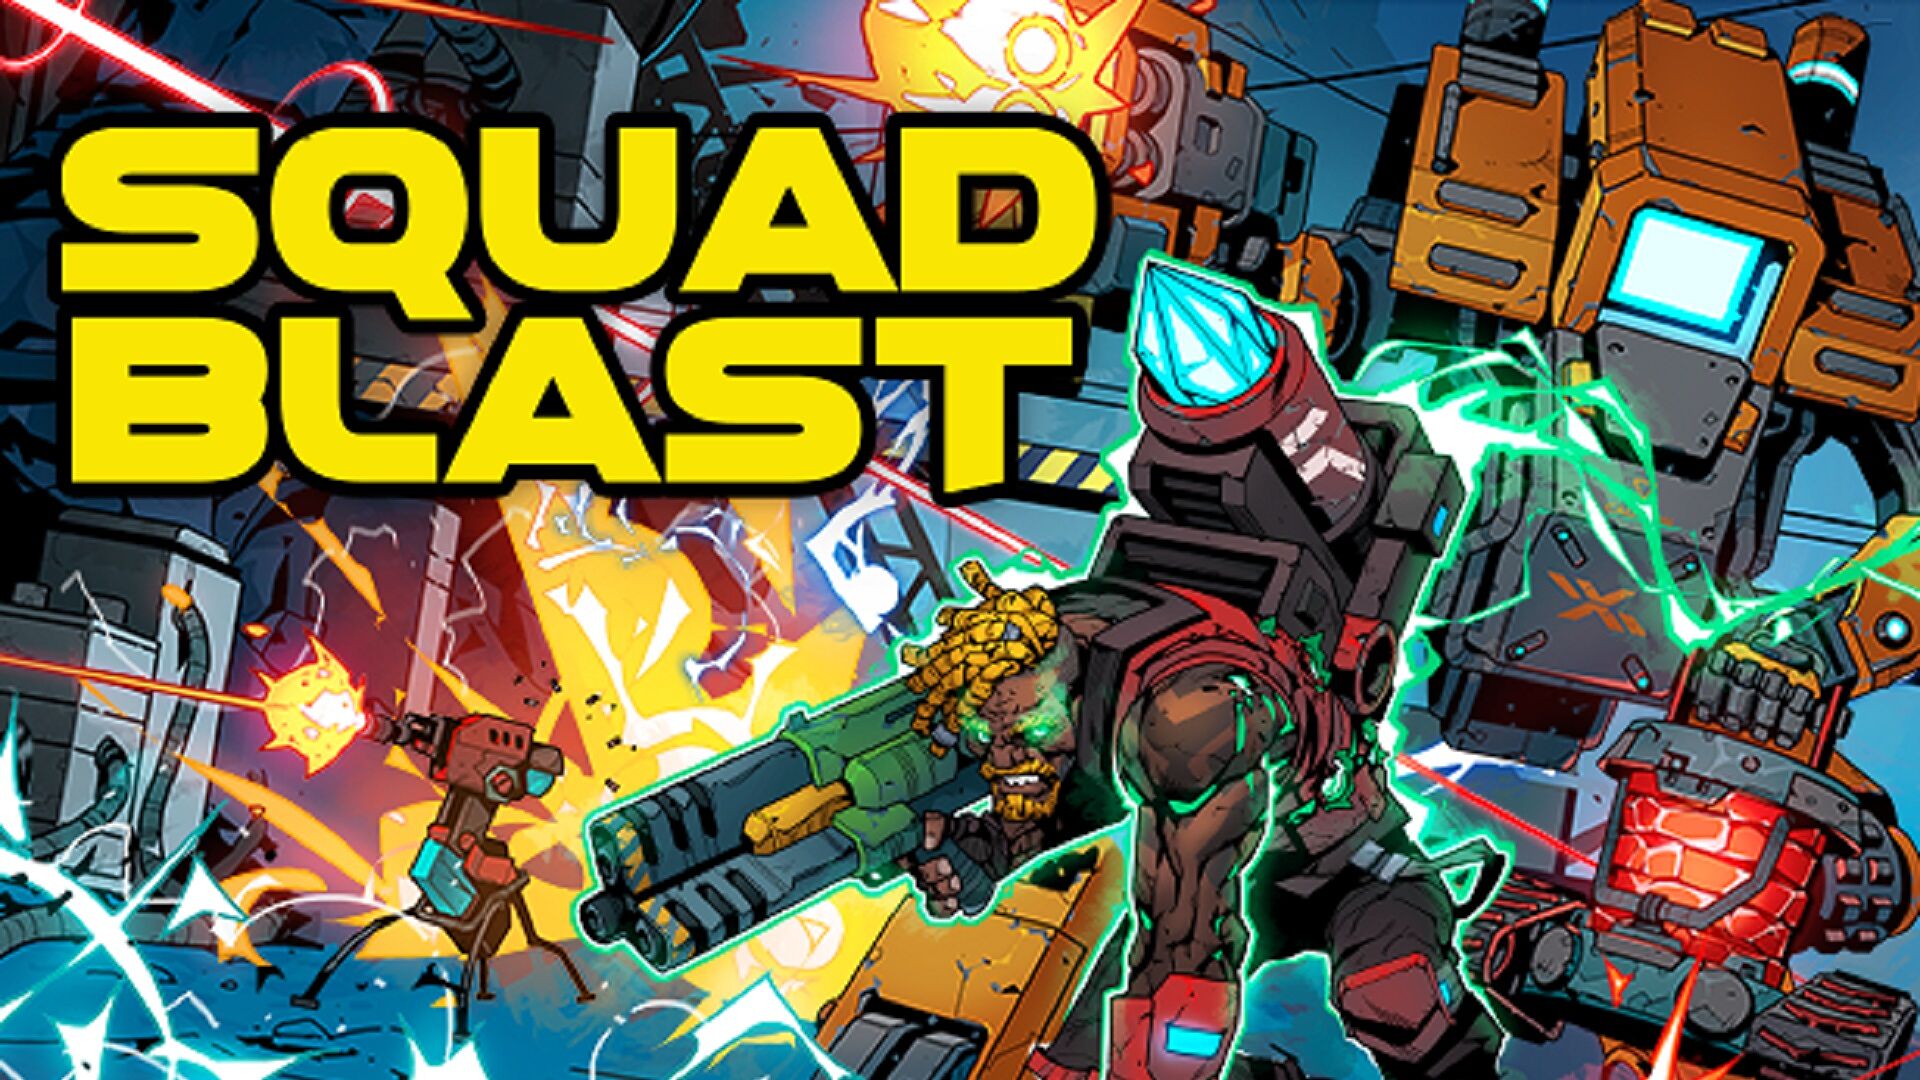 Squad Blast is Overwatch, CS:GO, and that competitive shooter spirit mashed into a 2D platformer